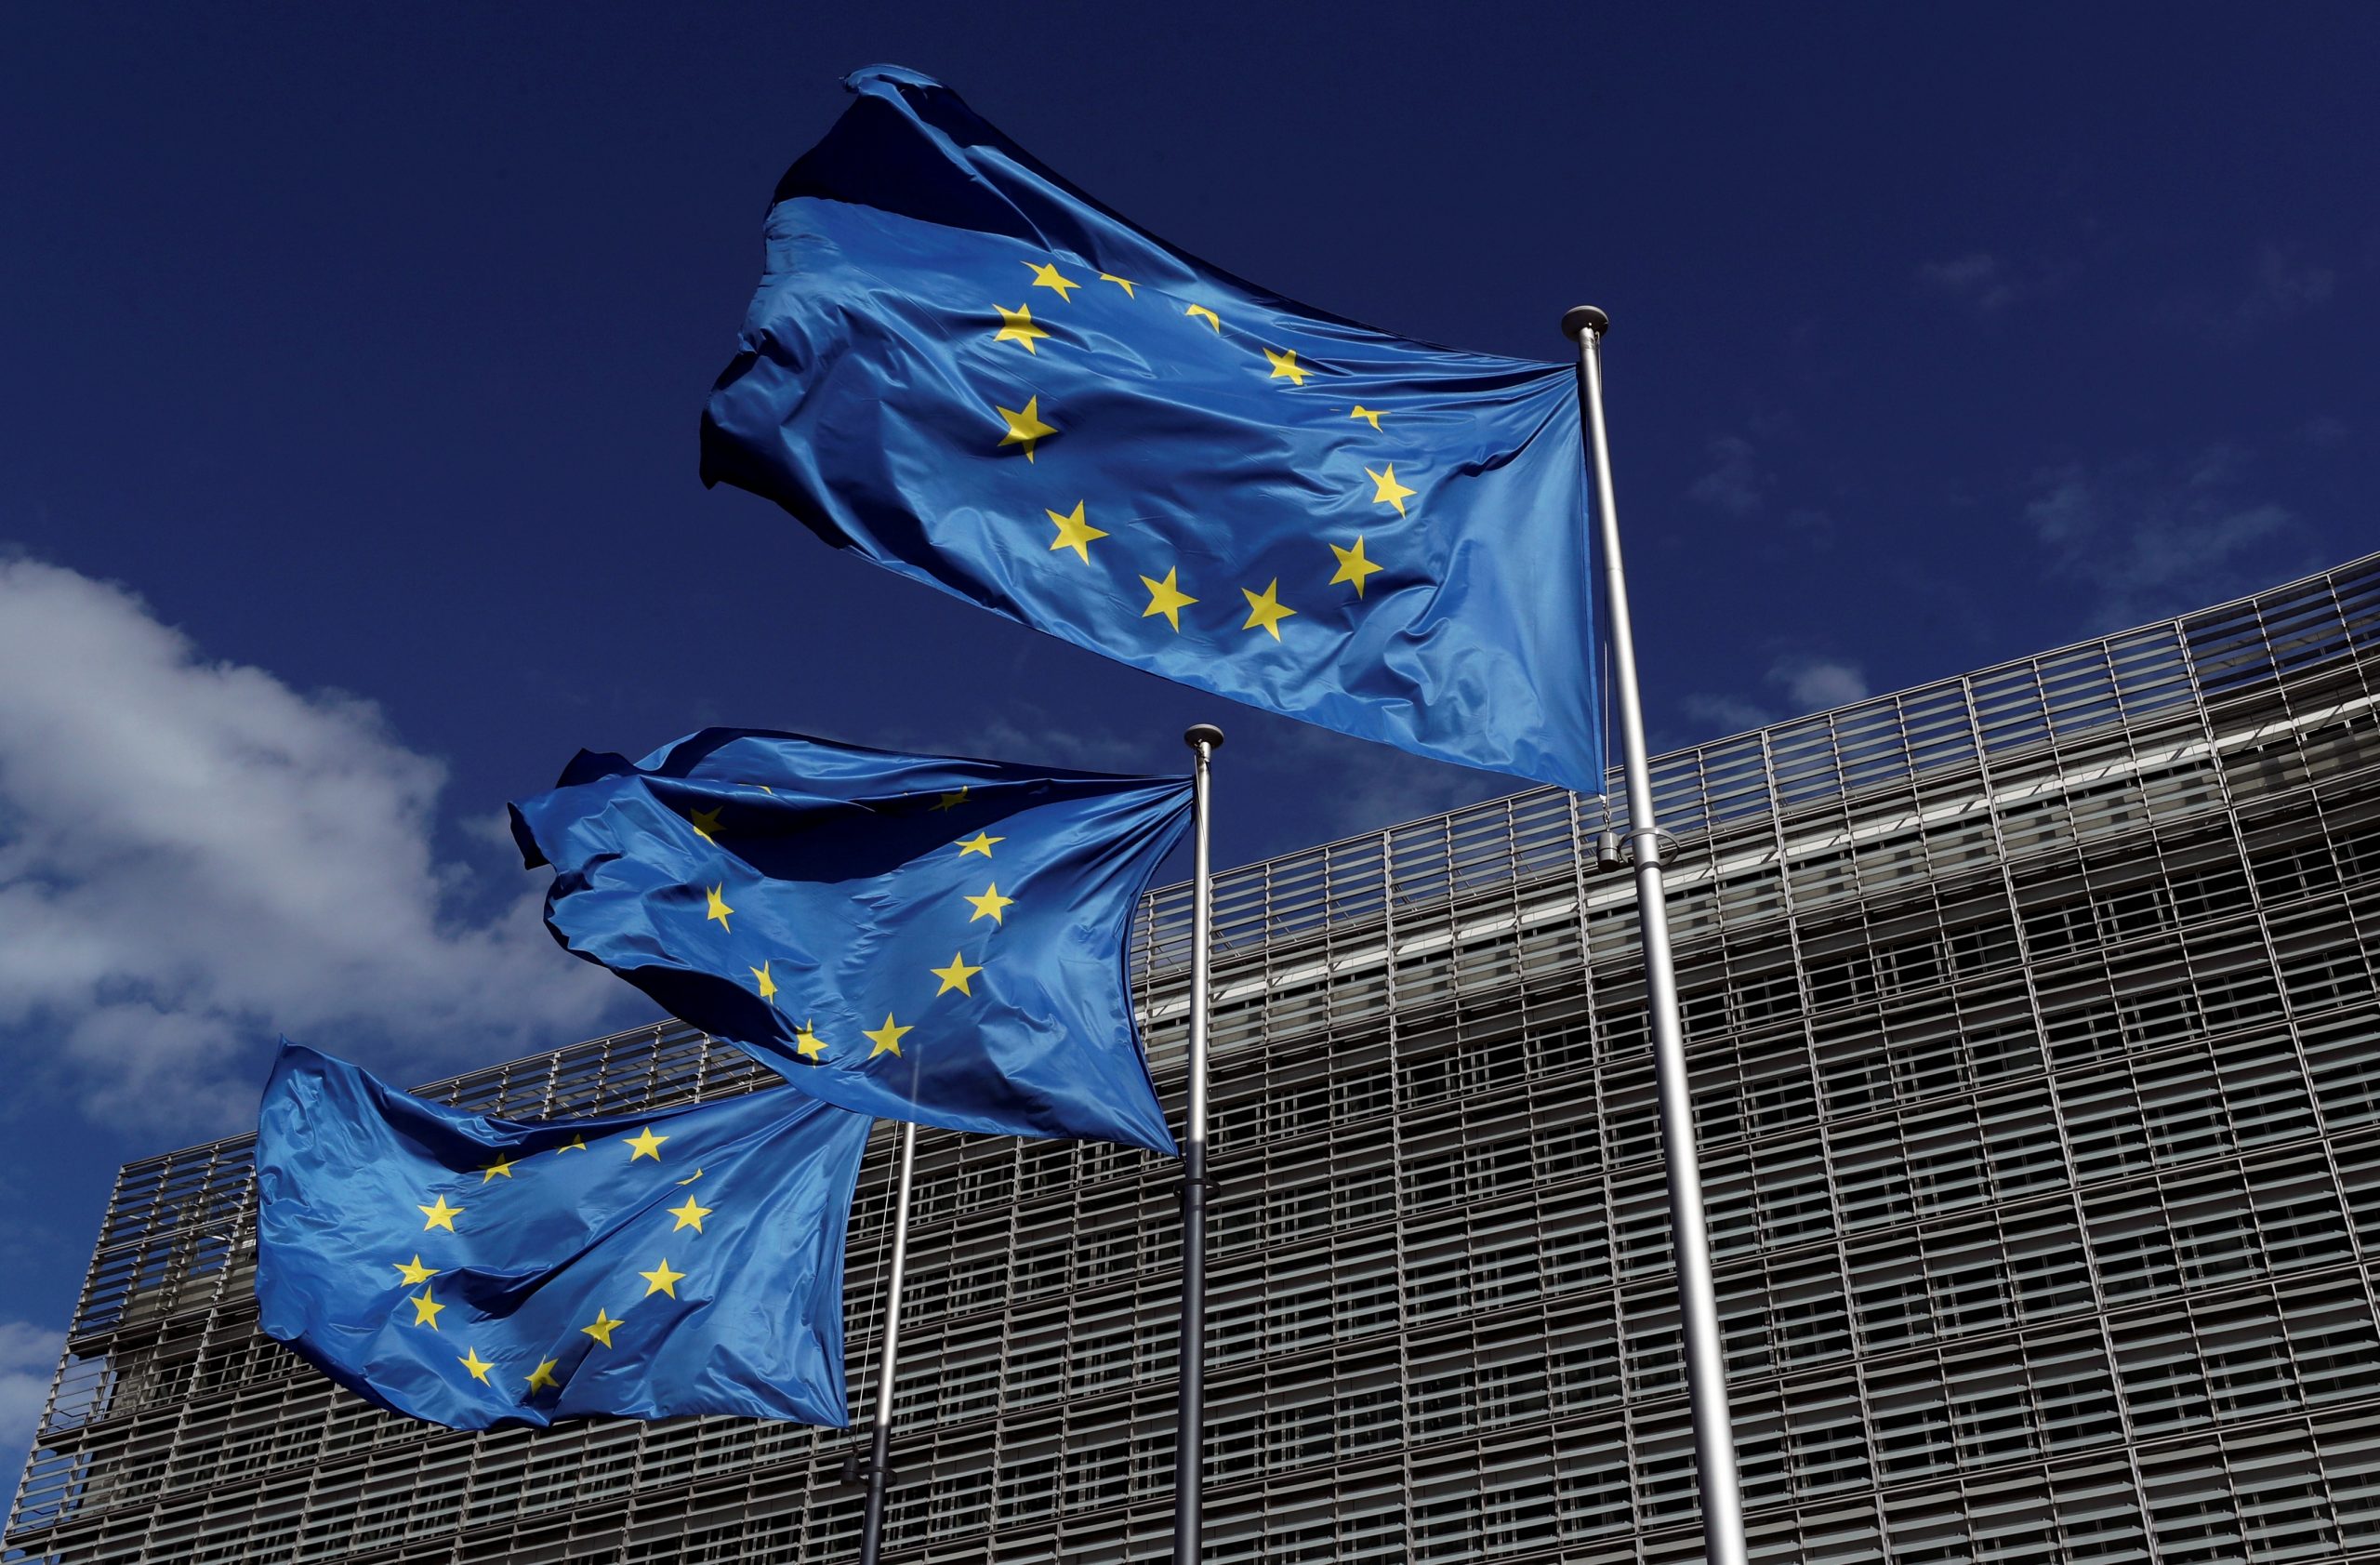 FILE PHOTO: European Union flags flutter outside the European Commission headquarters in Brussels FILE PHOTO: European Union flags flutter outside the European Commission headquarters in Brussels, Belgium August 21, 2020. REUTERS/Yves Herman/File Photo YVES HERMAN